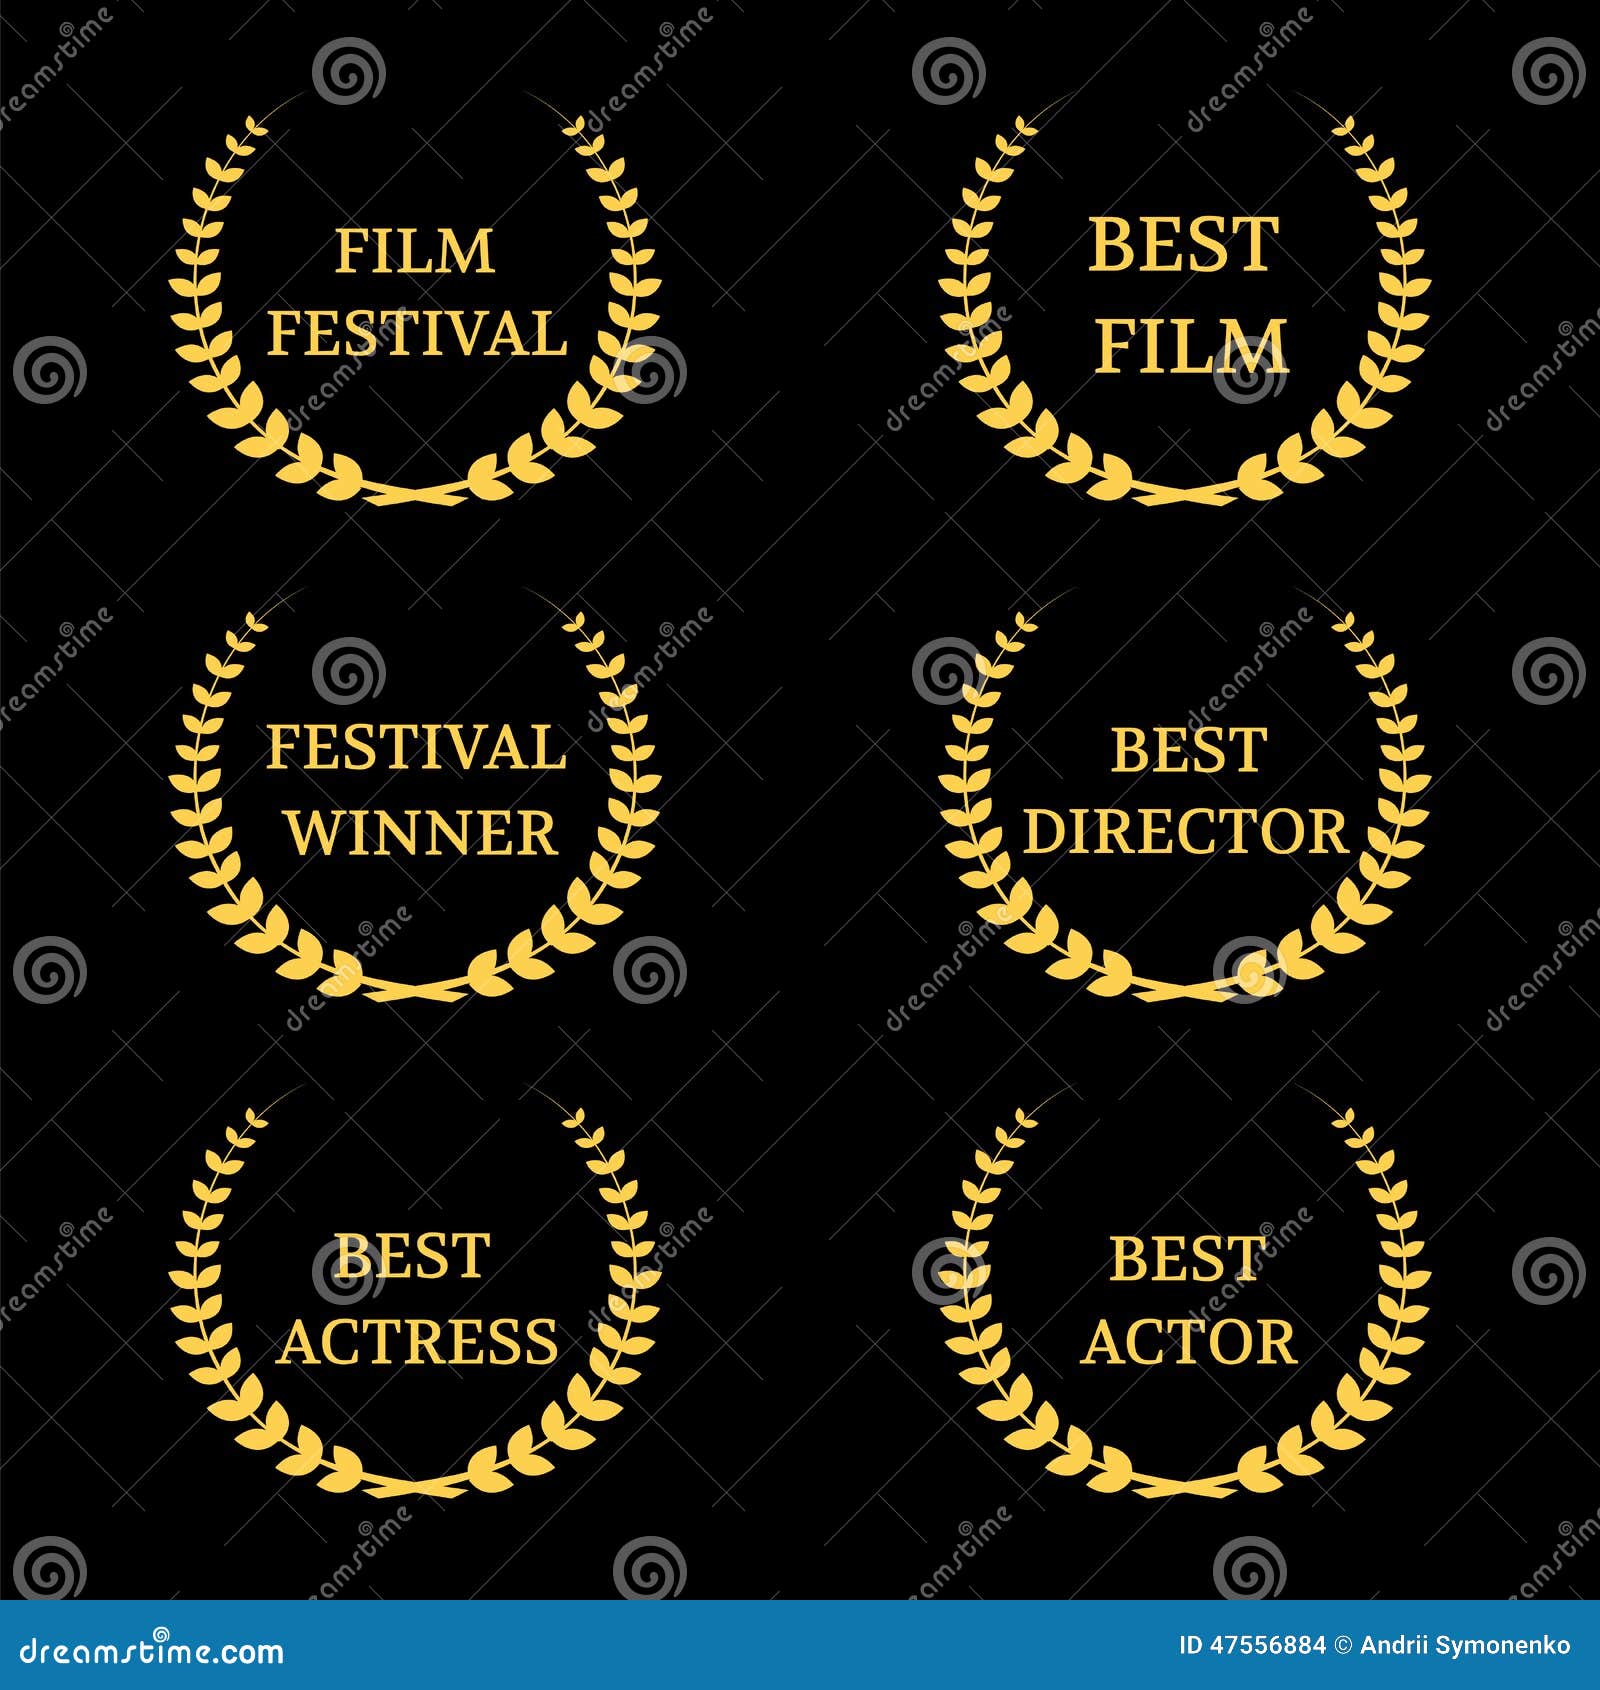 Vector Film Awards banners stock vector. Illustration of feature - 47556884